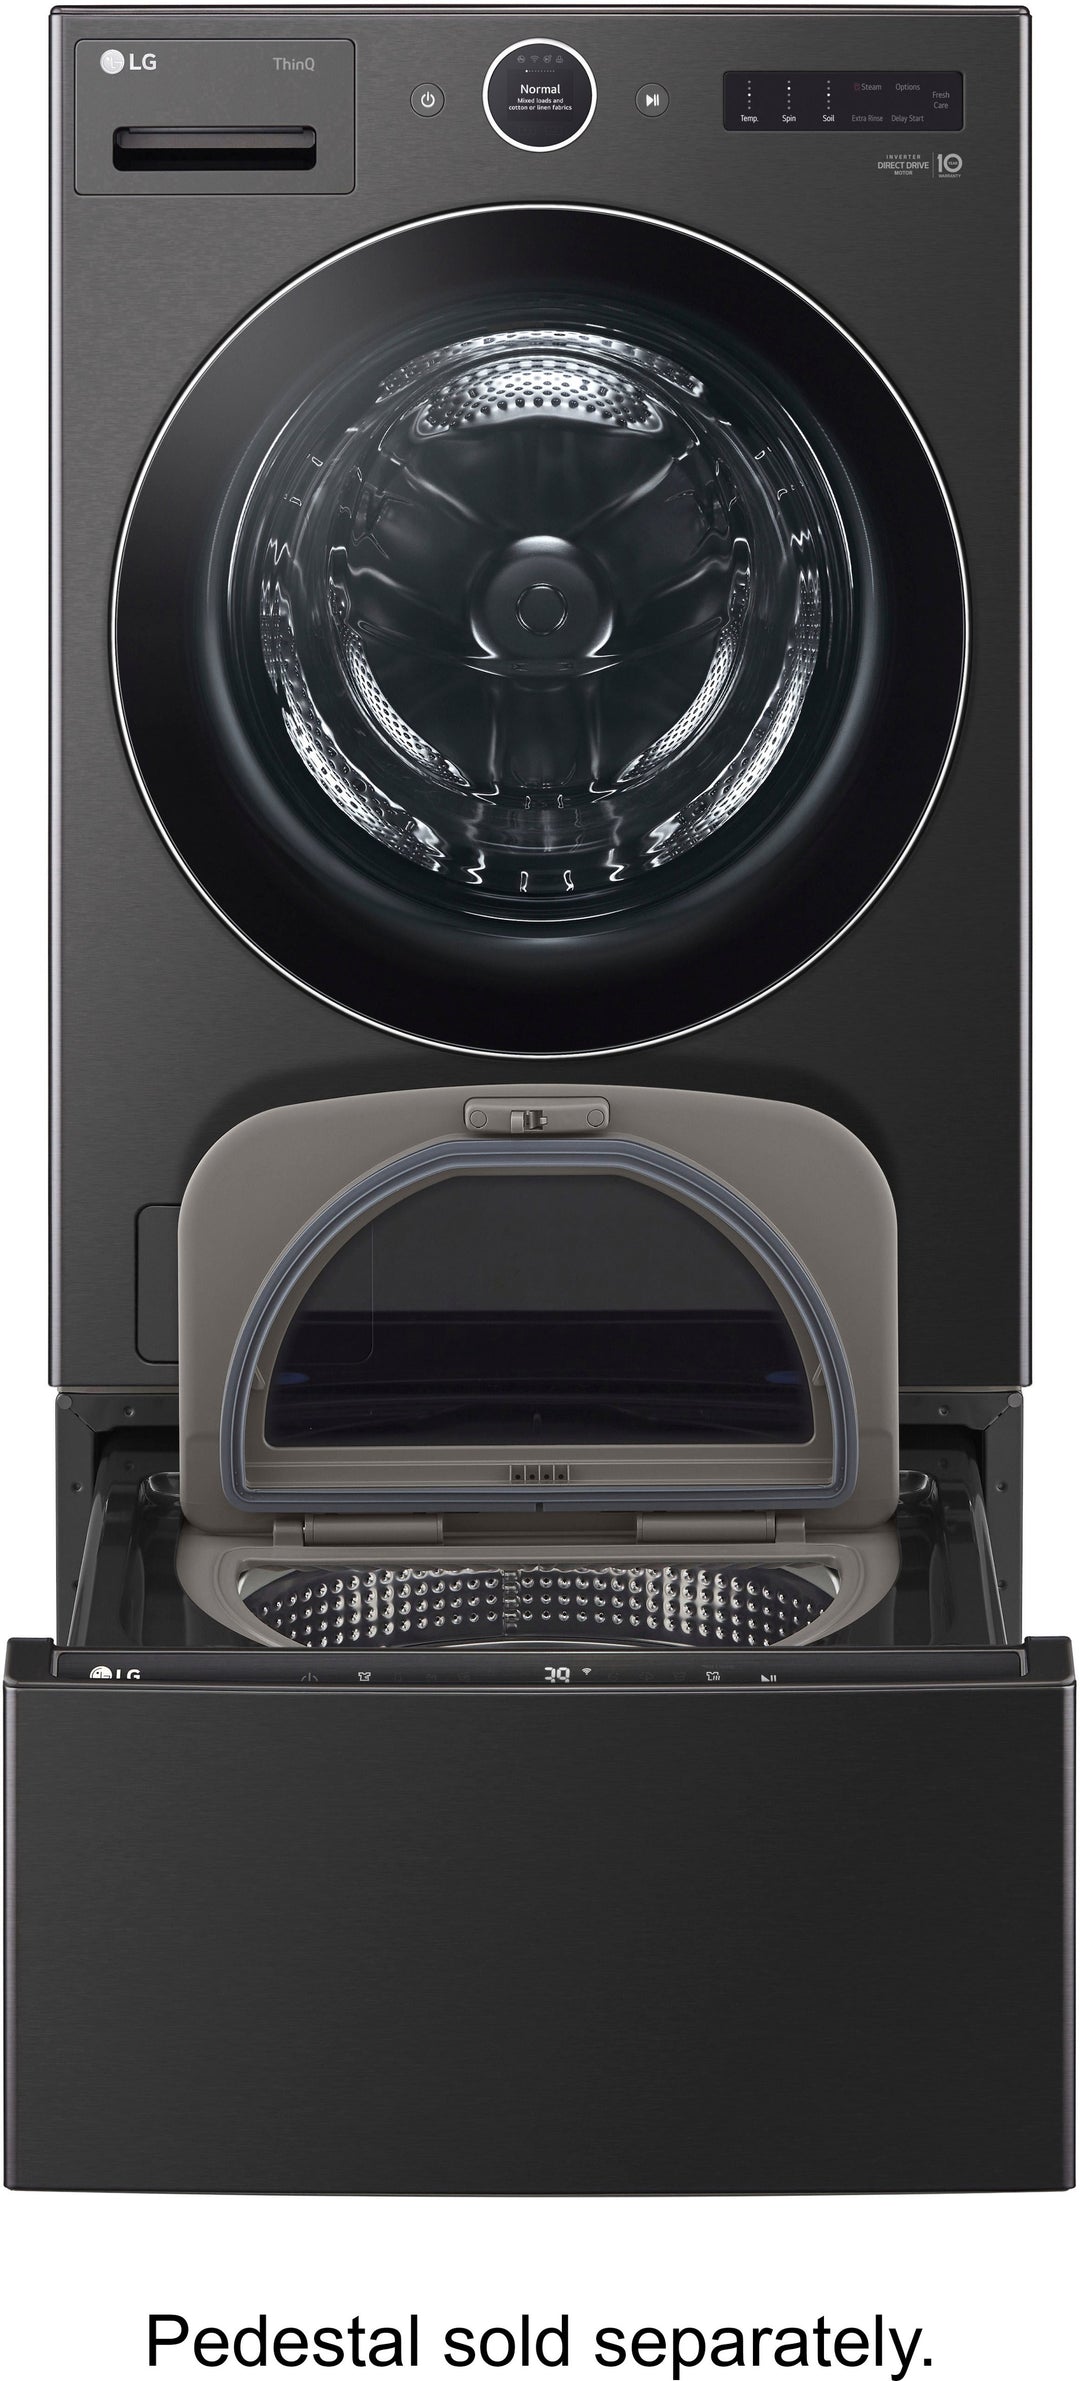 LG - 5.0 Cu. Ft. High-Efficiency Stackable Smart Front Load Washer with Steam and TurboWash 360 - Black steel_17